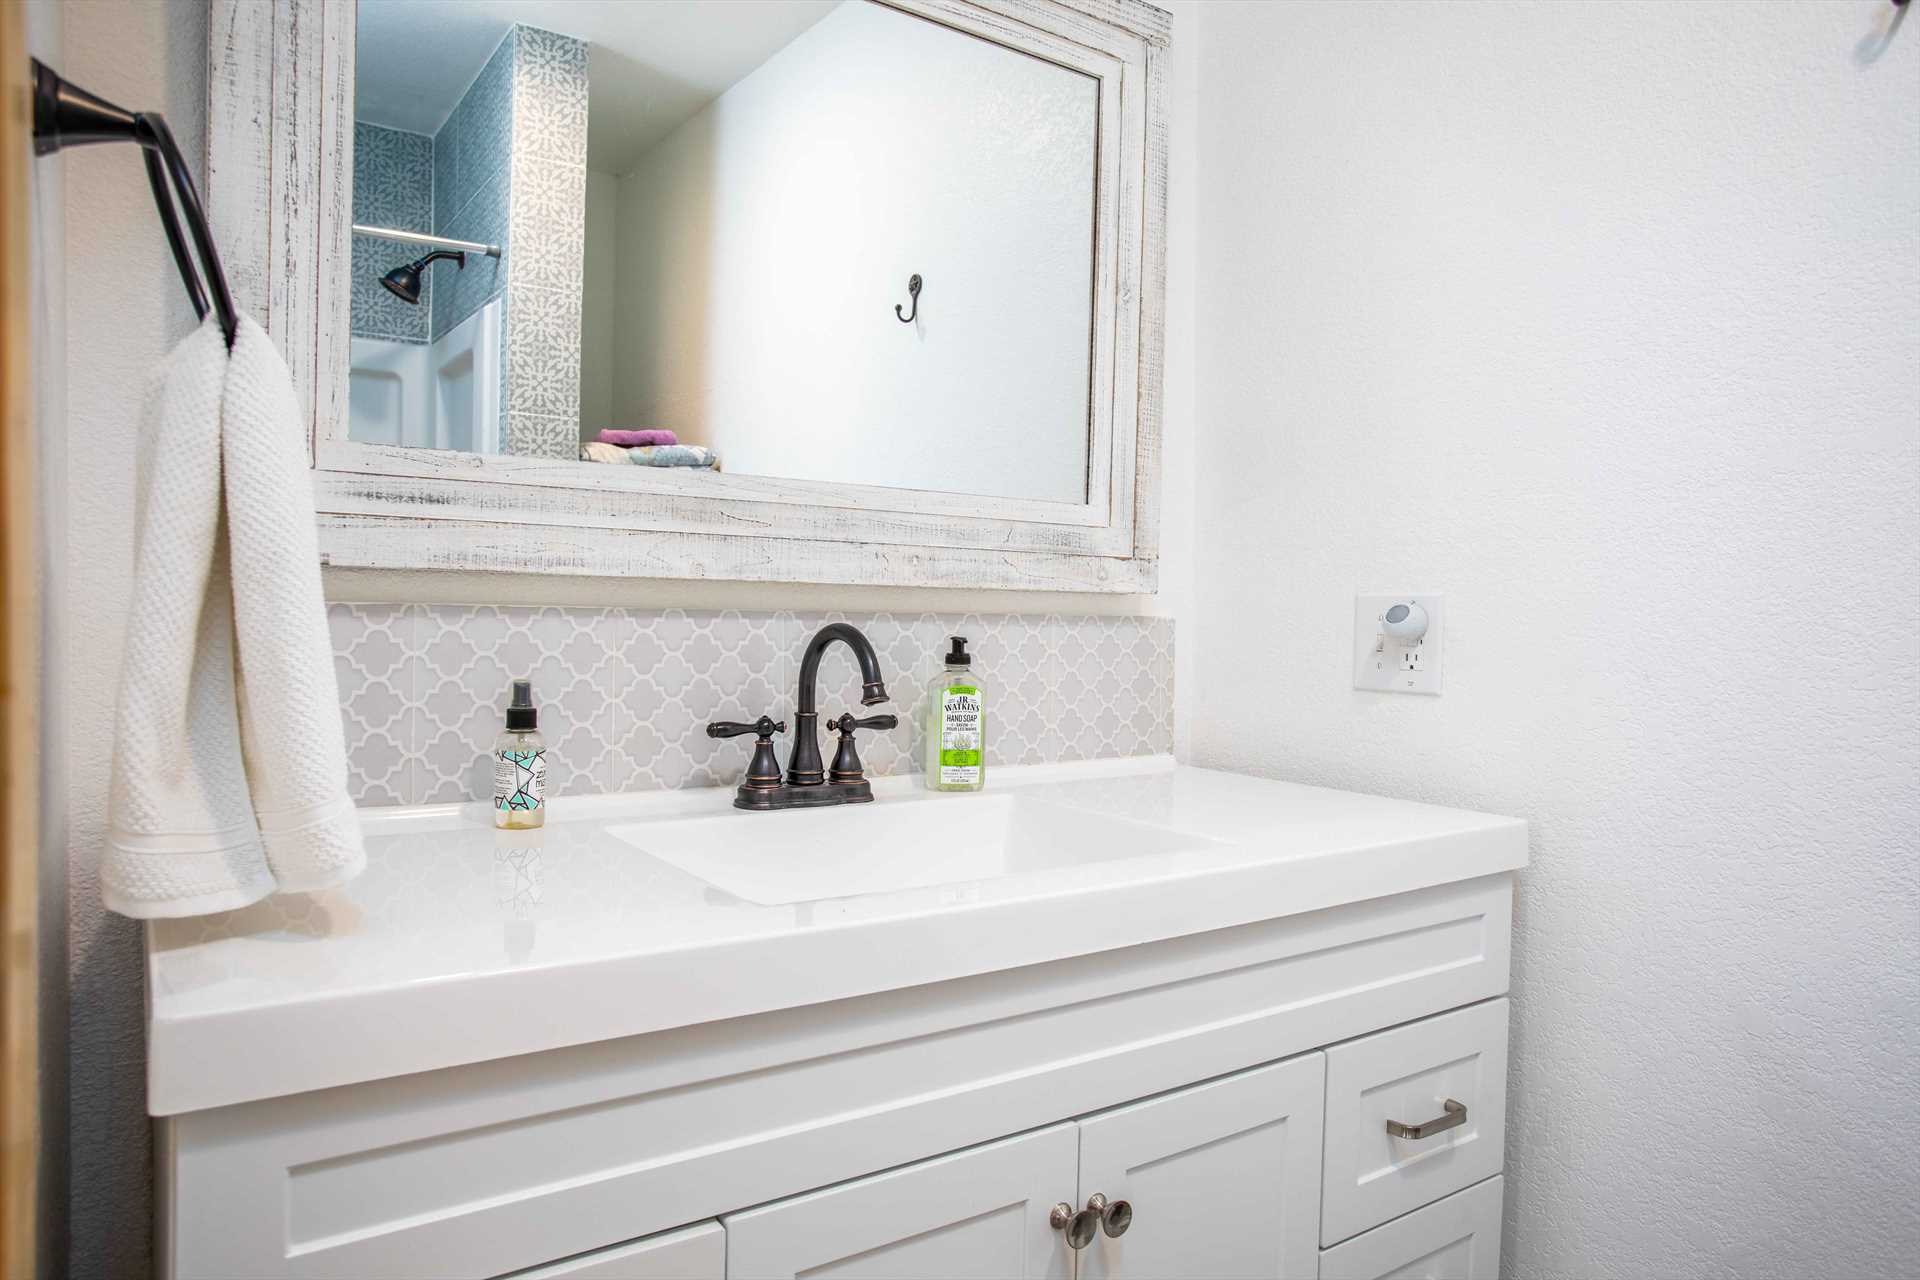                                                 A big, mirrored vanity with plenty of toiletry space graces the spotlessly-clean second bathroom!